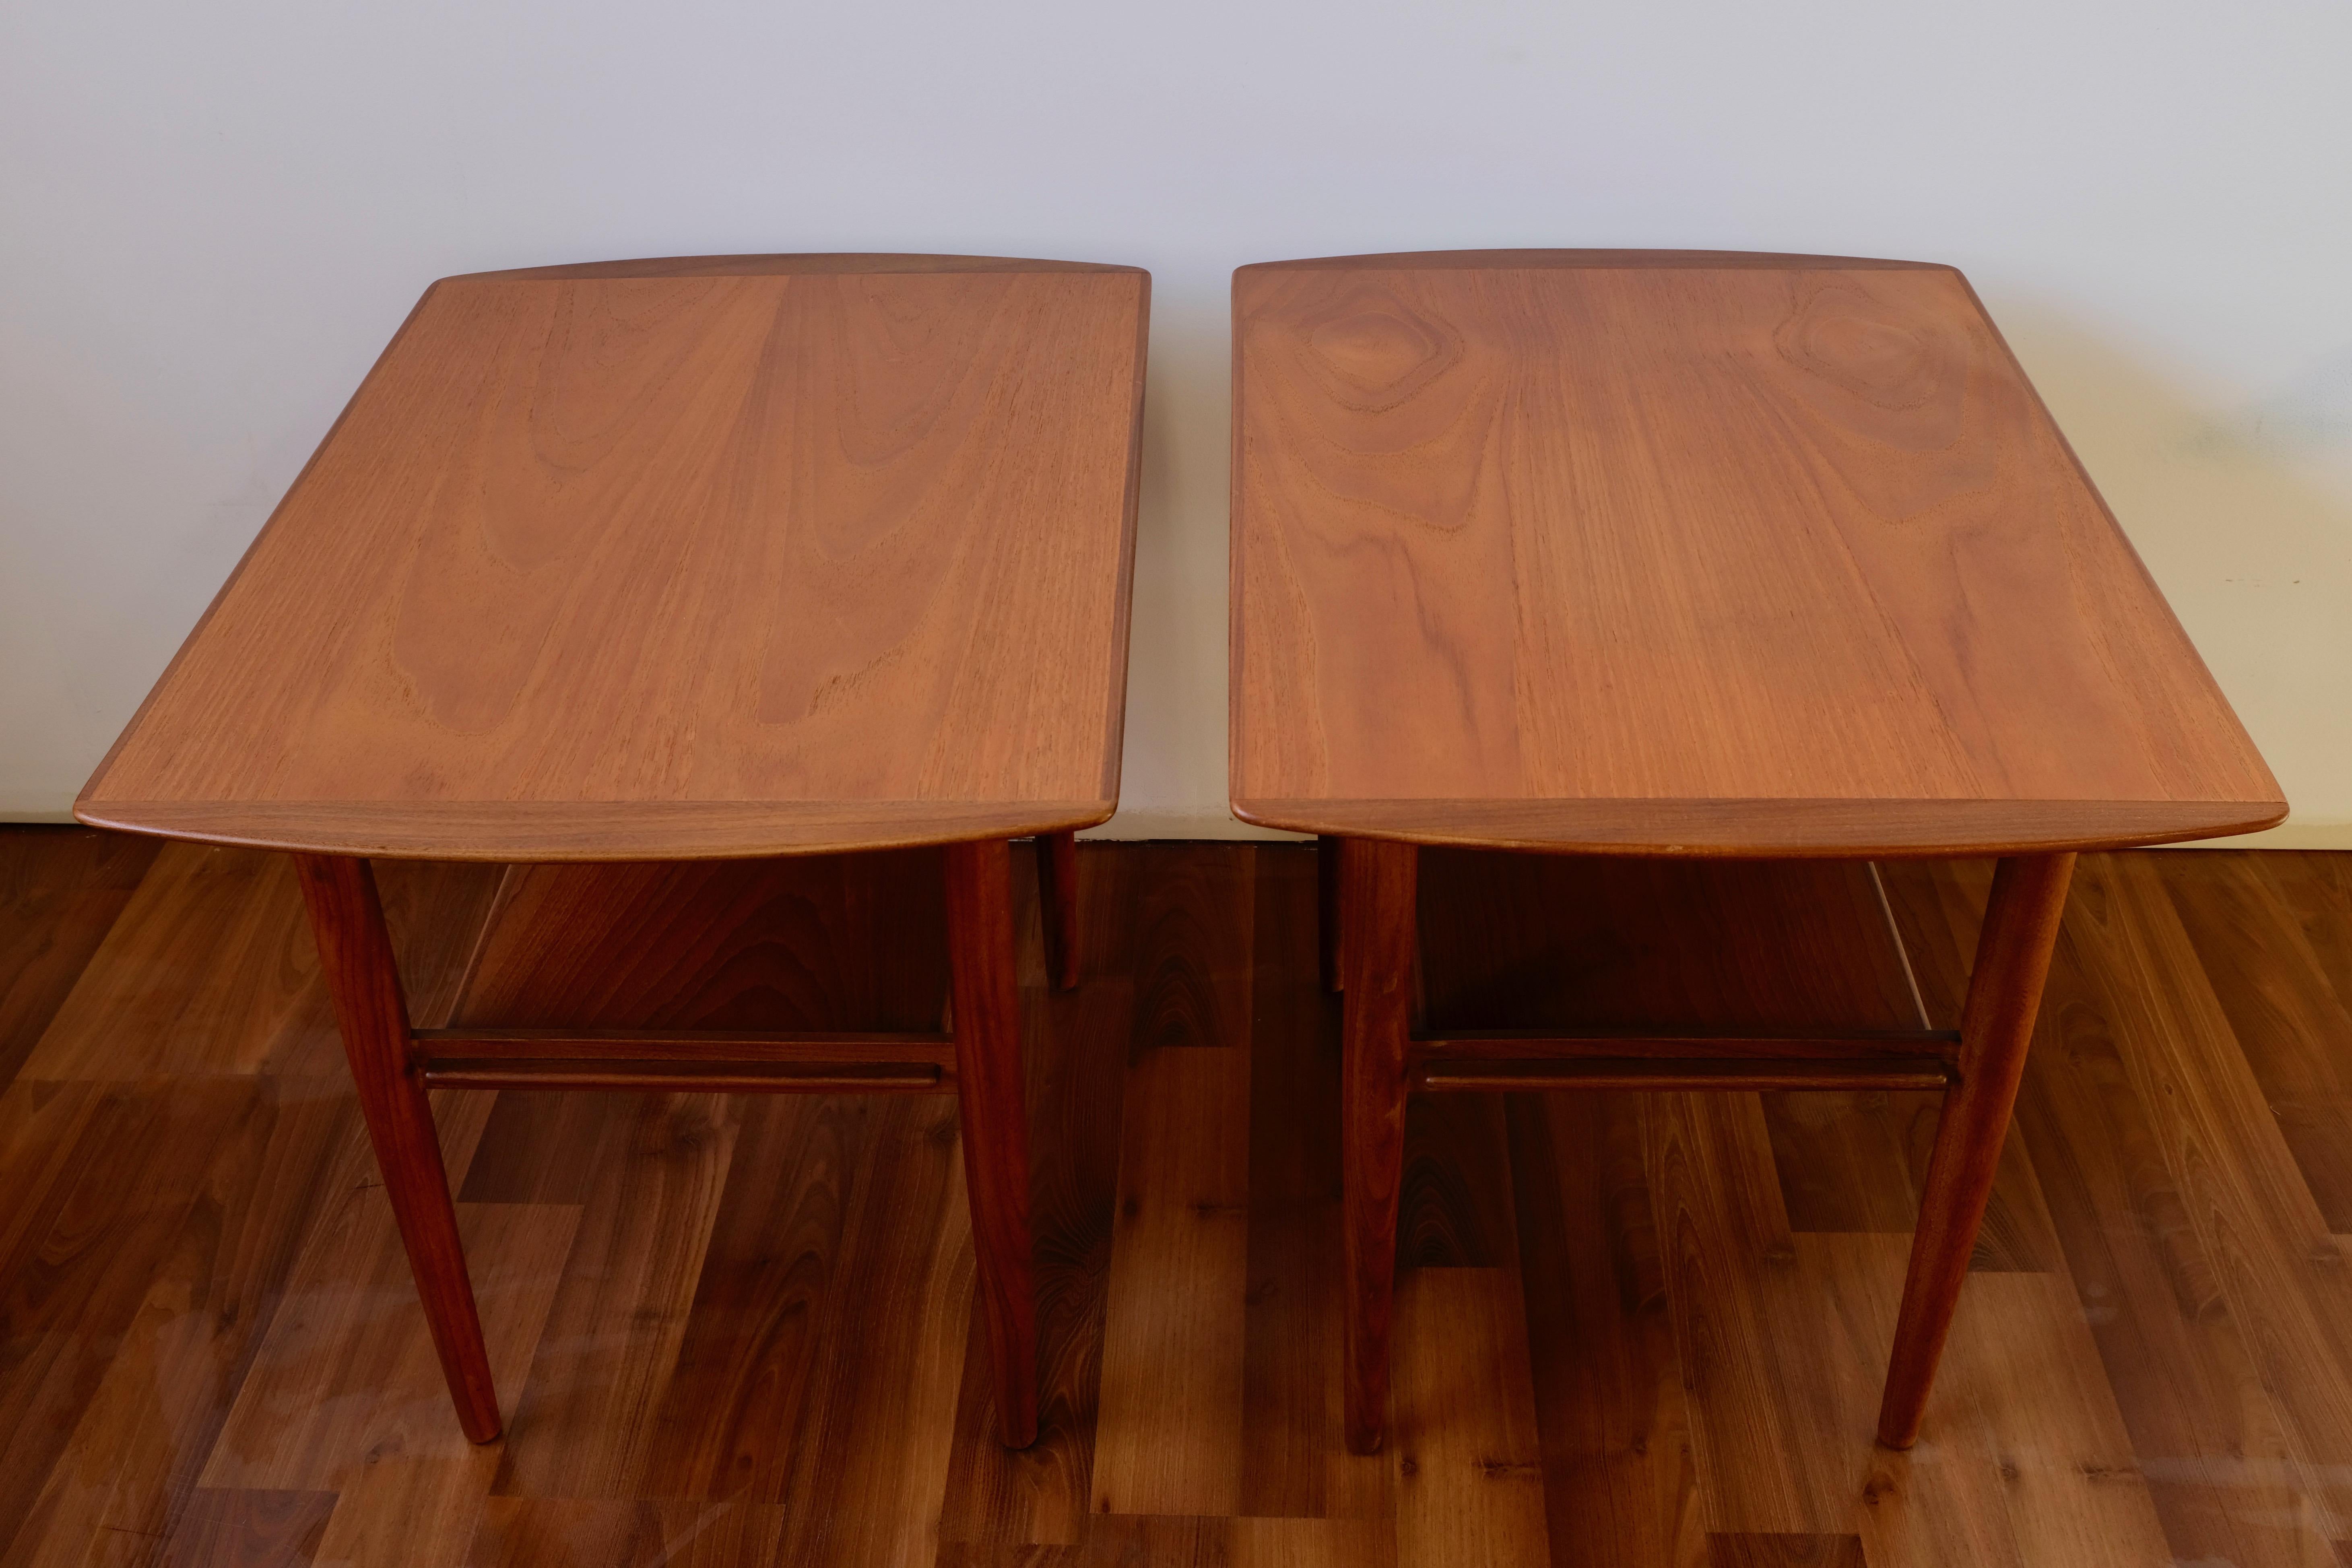 Two matching end tables each with a single shelf below the top. The frames are constructed of solid teak while the tops and shelves are constructed of a solid wood core with teak veneer and solid teak edging. 

The tables have been refinished and